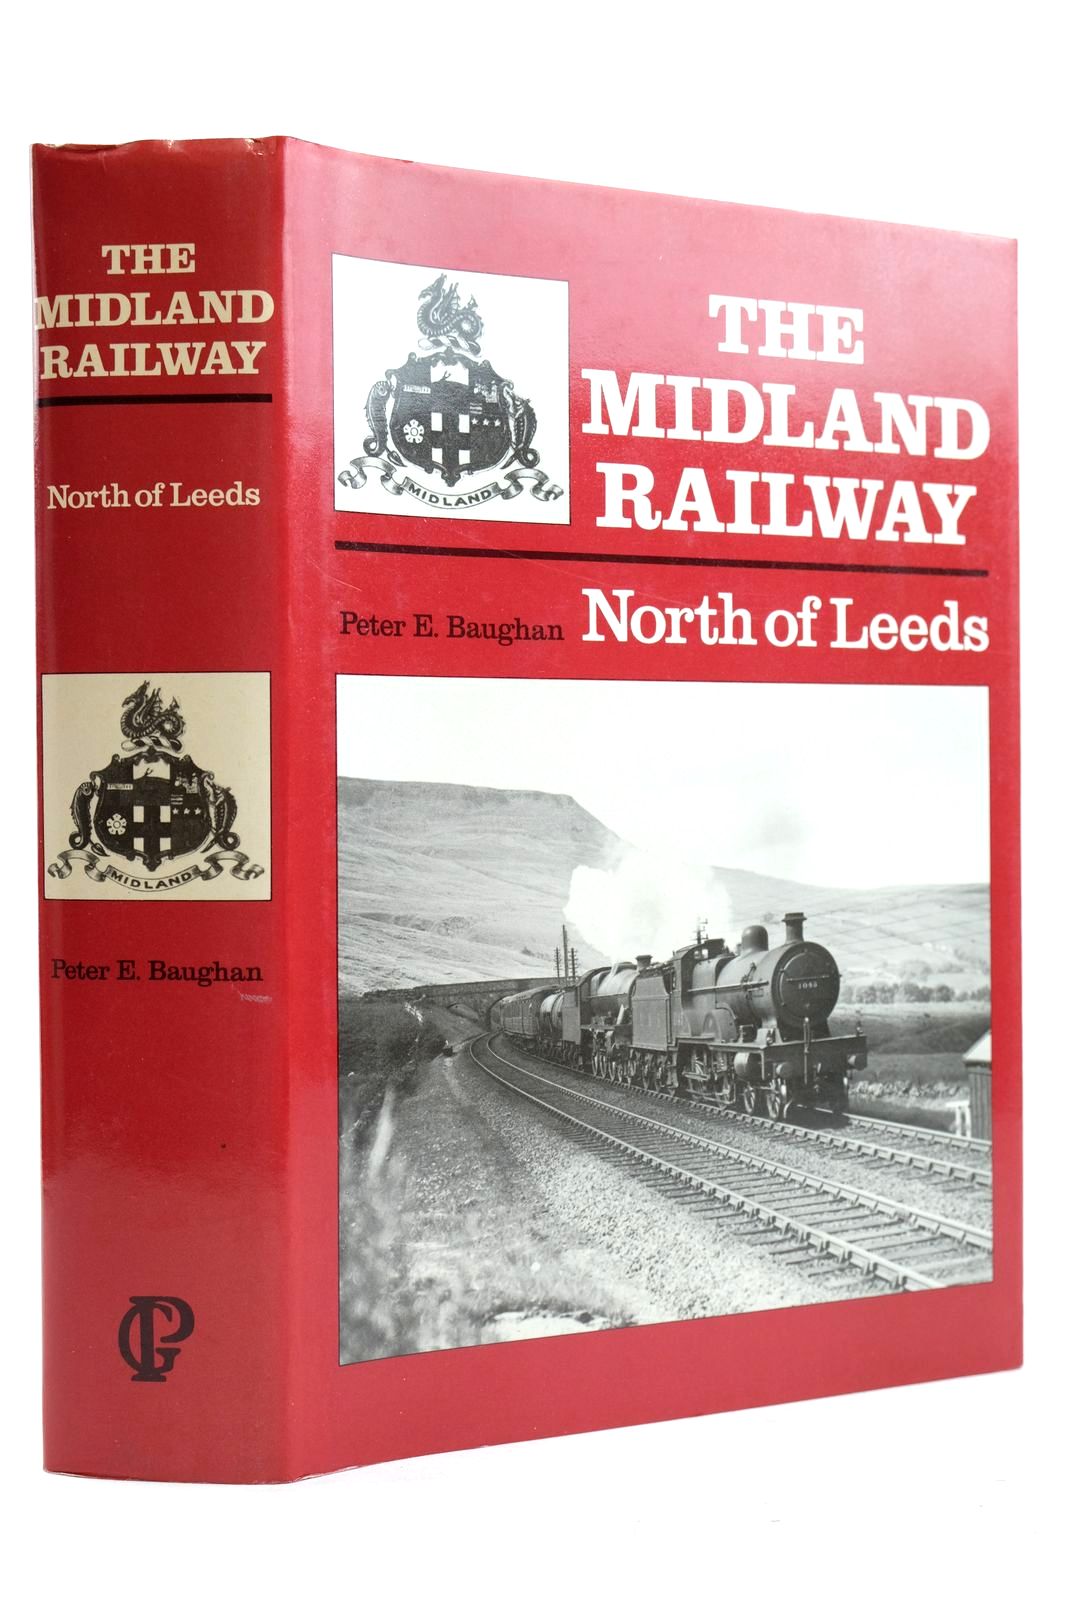 Photo of MIDLAND RAILWAY NORTH OF LEEDS written by Baughan, Peter E. published by Book Club Associates (STOCK CODE: 2133009)  for sale by Stella & Rose's Books